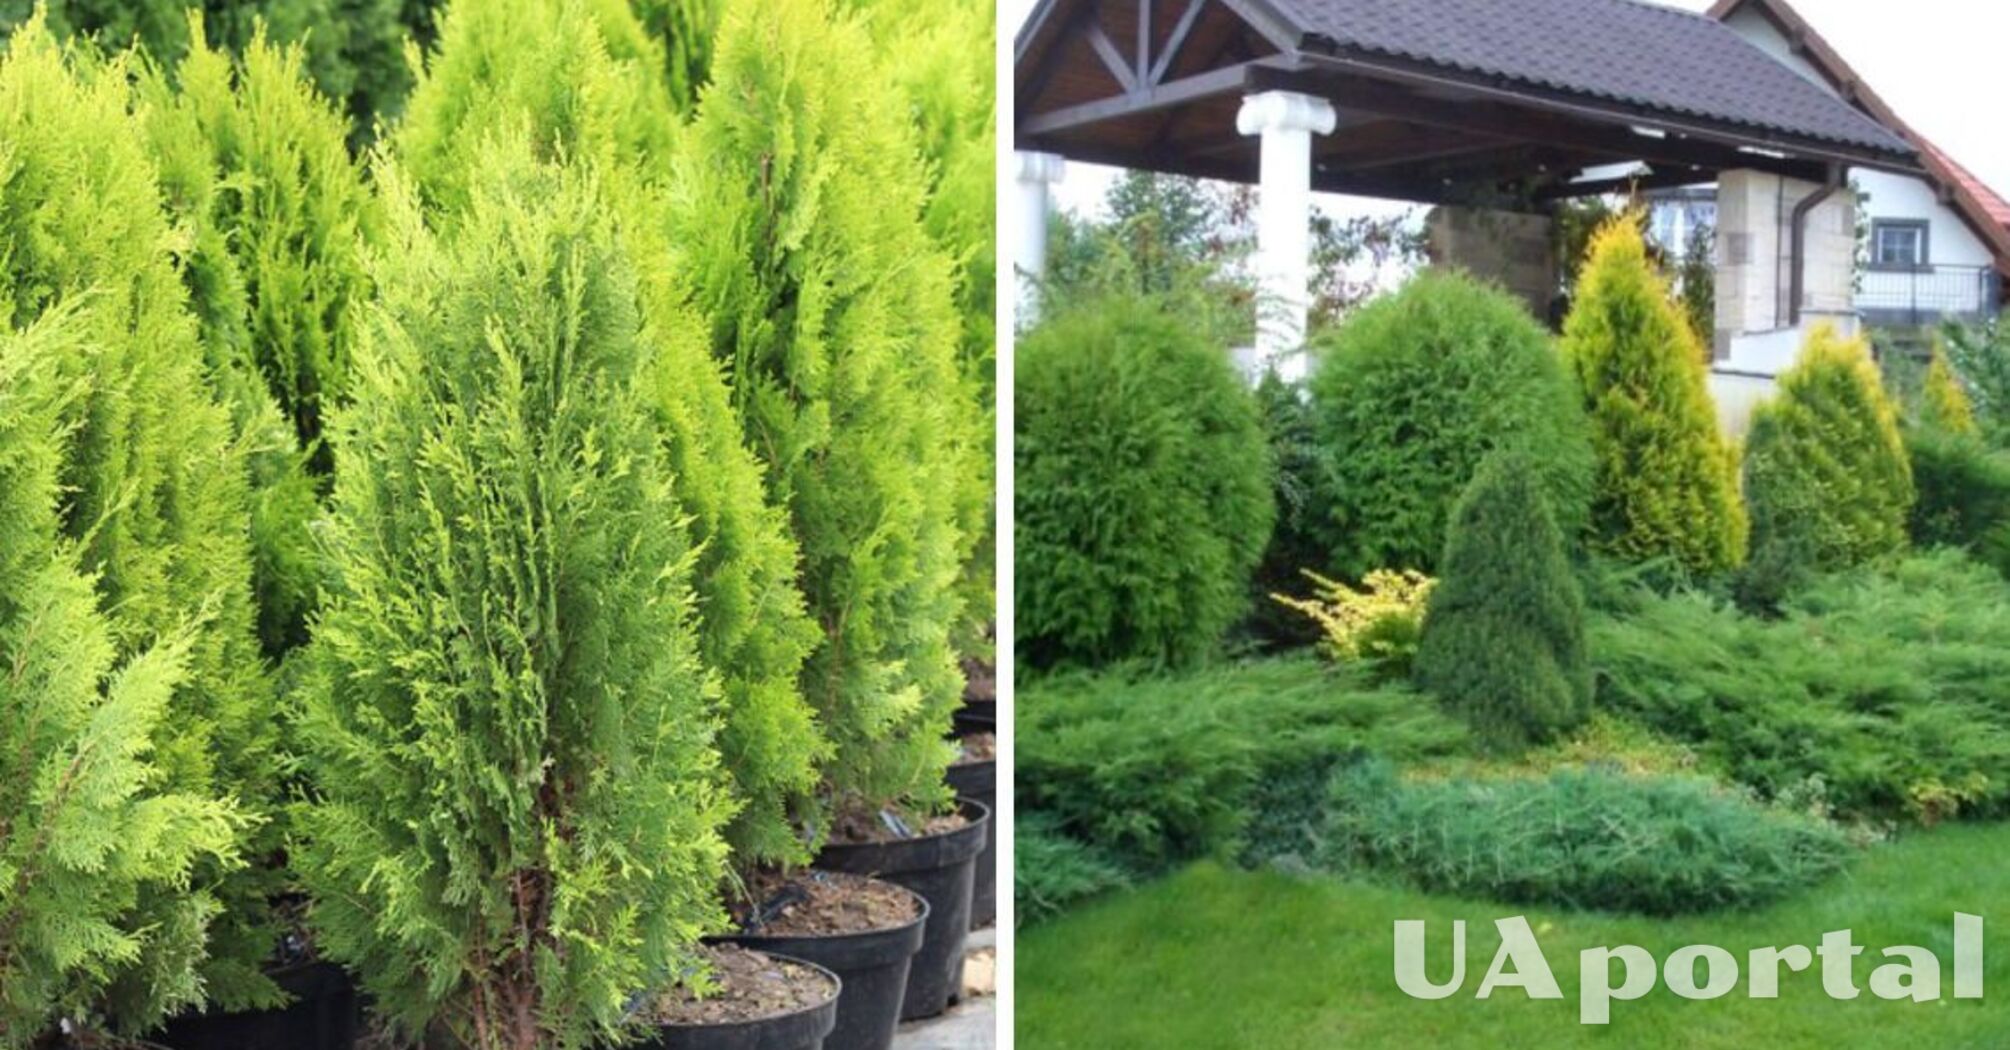 Which conifers and shrubs are best suited for a summer cottage